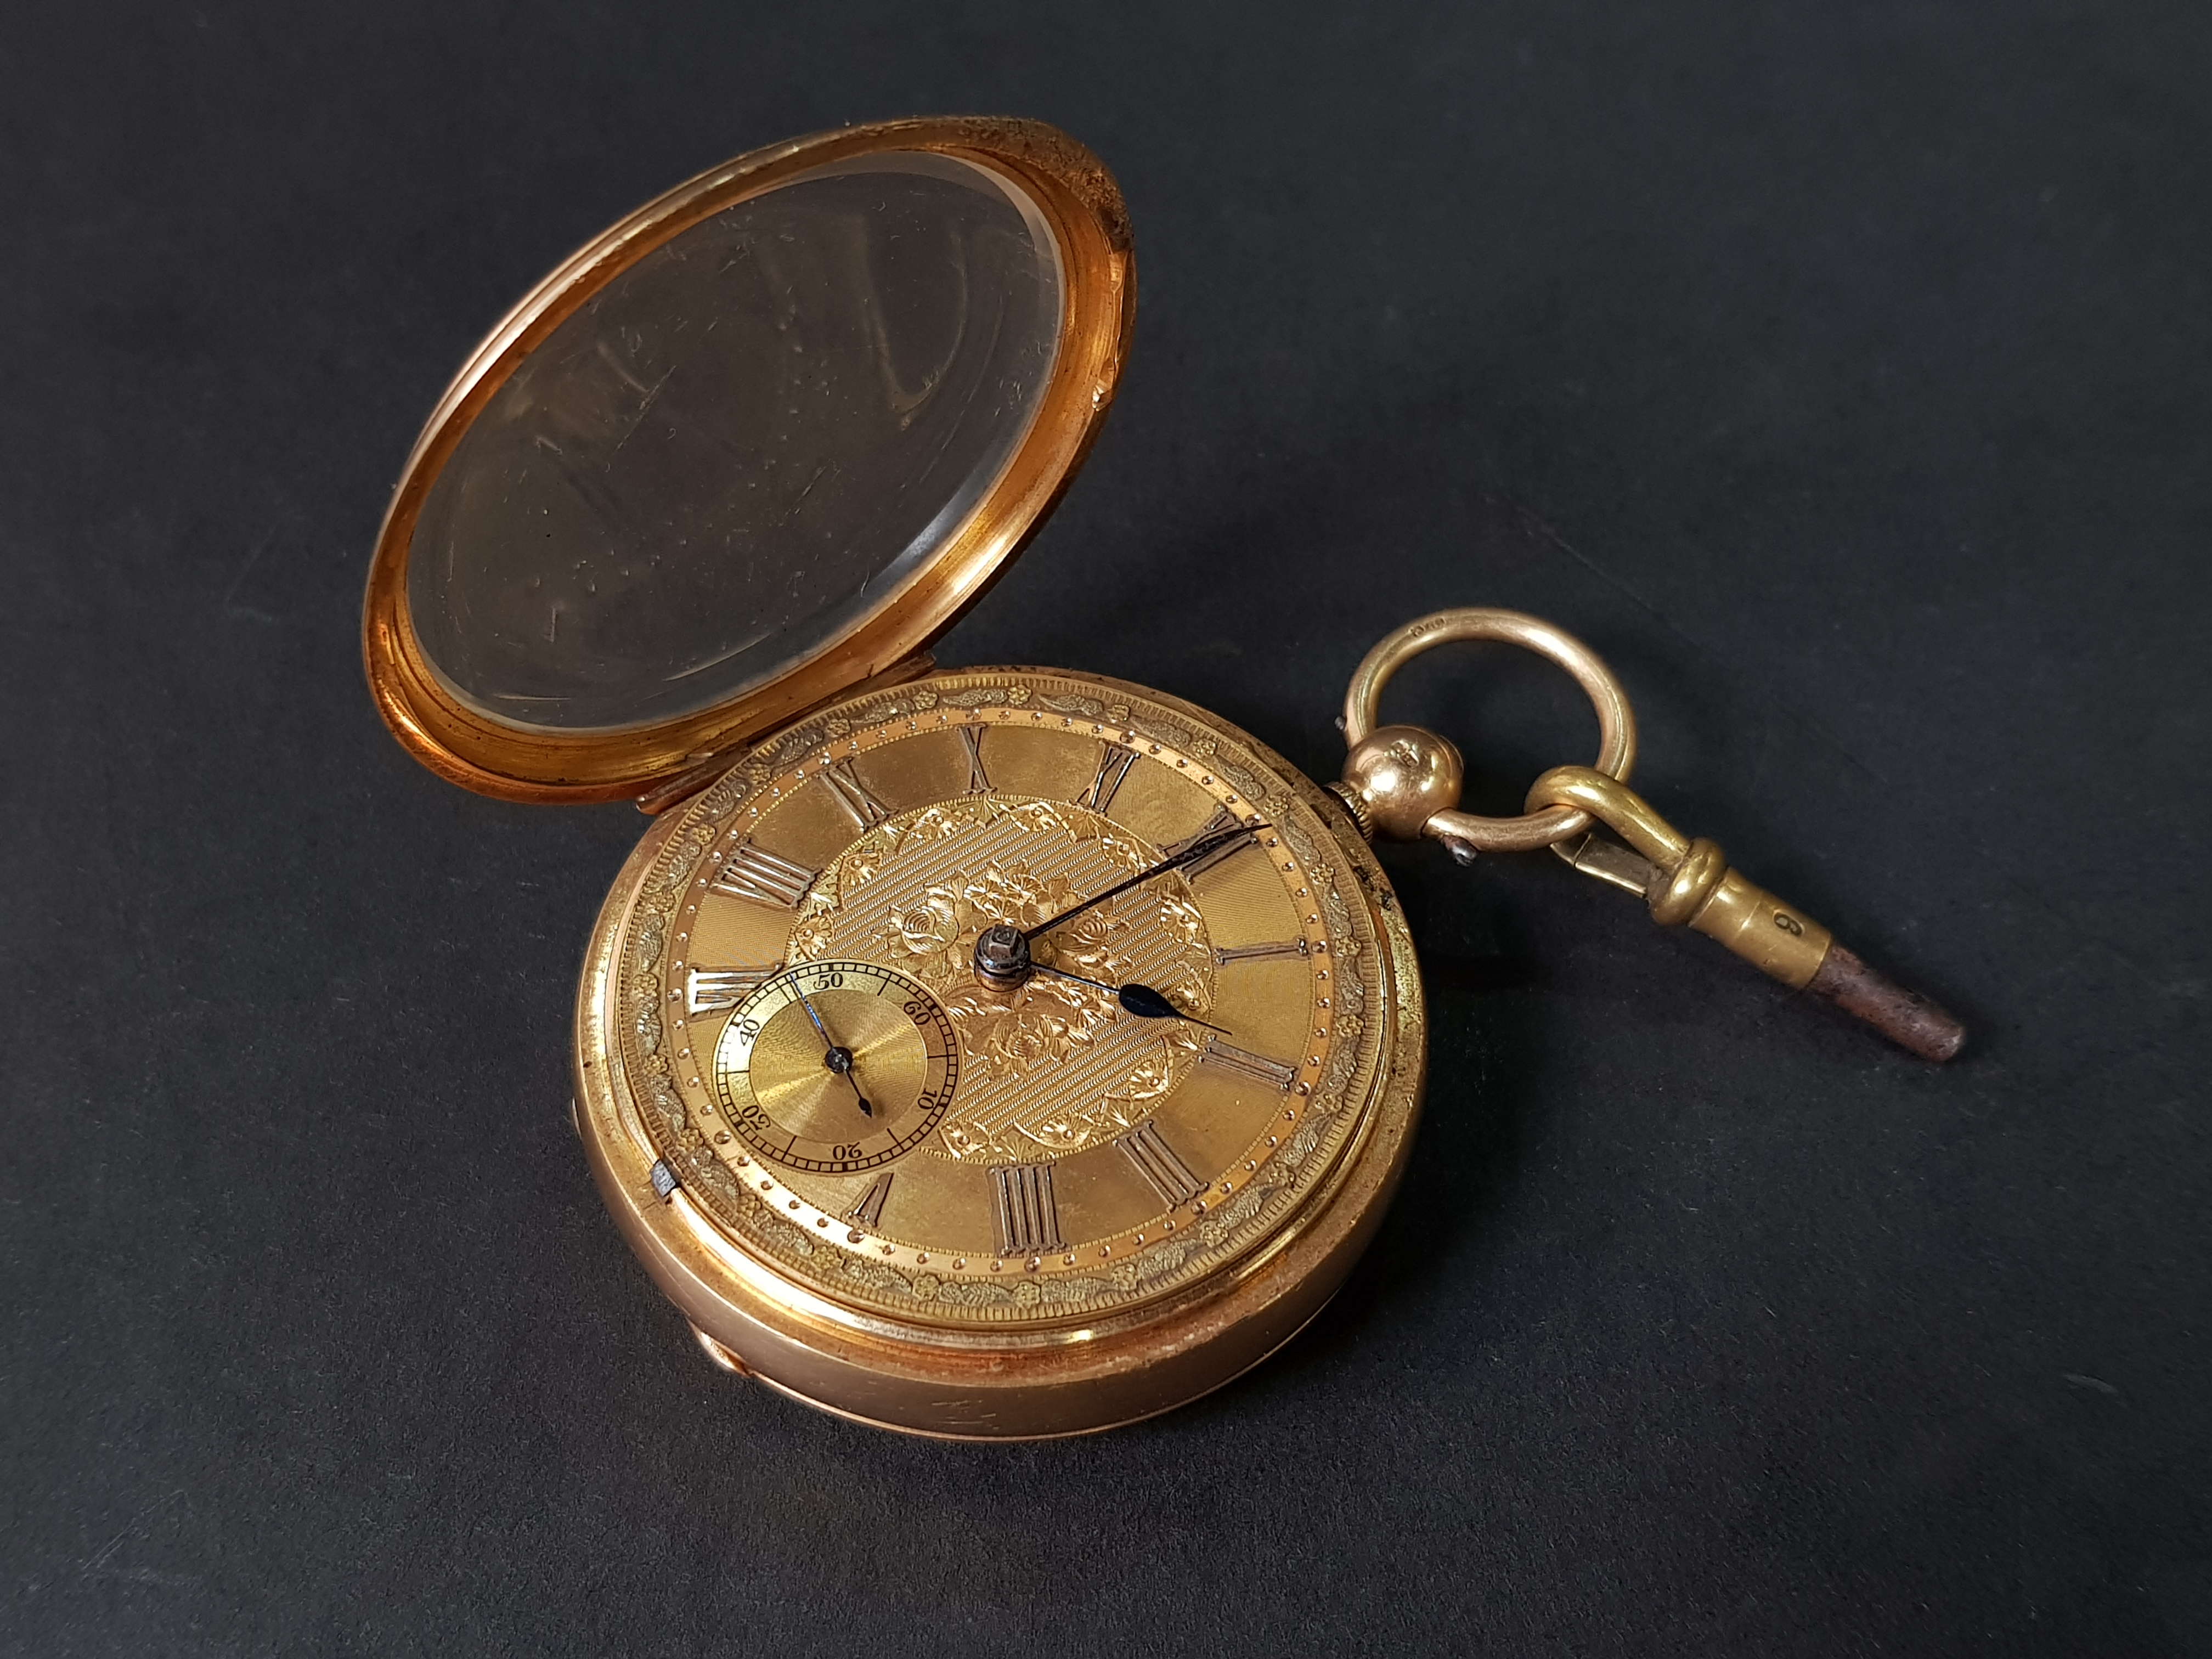 18 CARAT GOLD OPEN FACED POCKET WATCH IN WORKING ORDER WITH DIAMOND END STEM, FUSEE MOVEMENT,